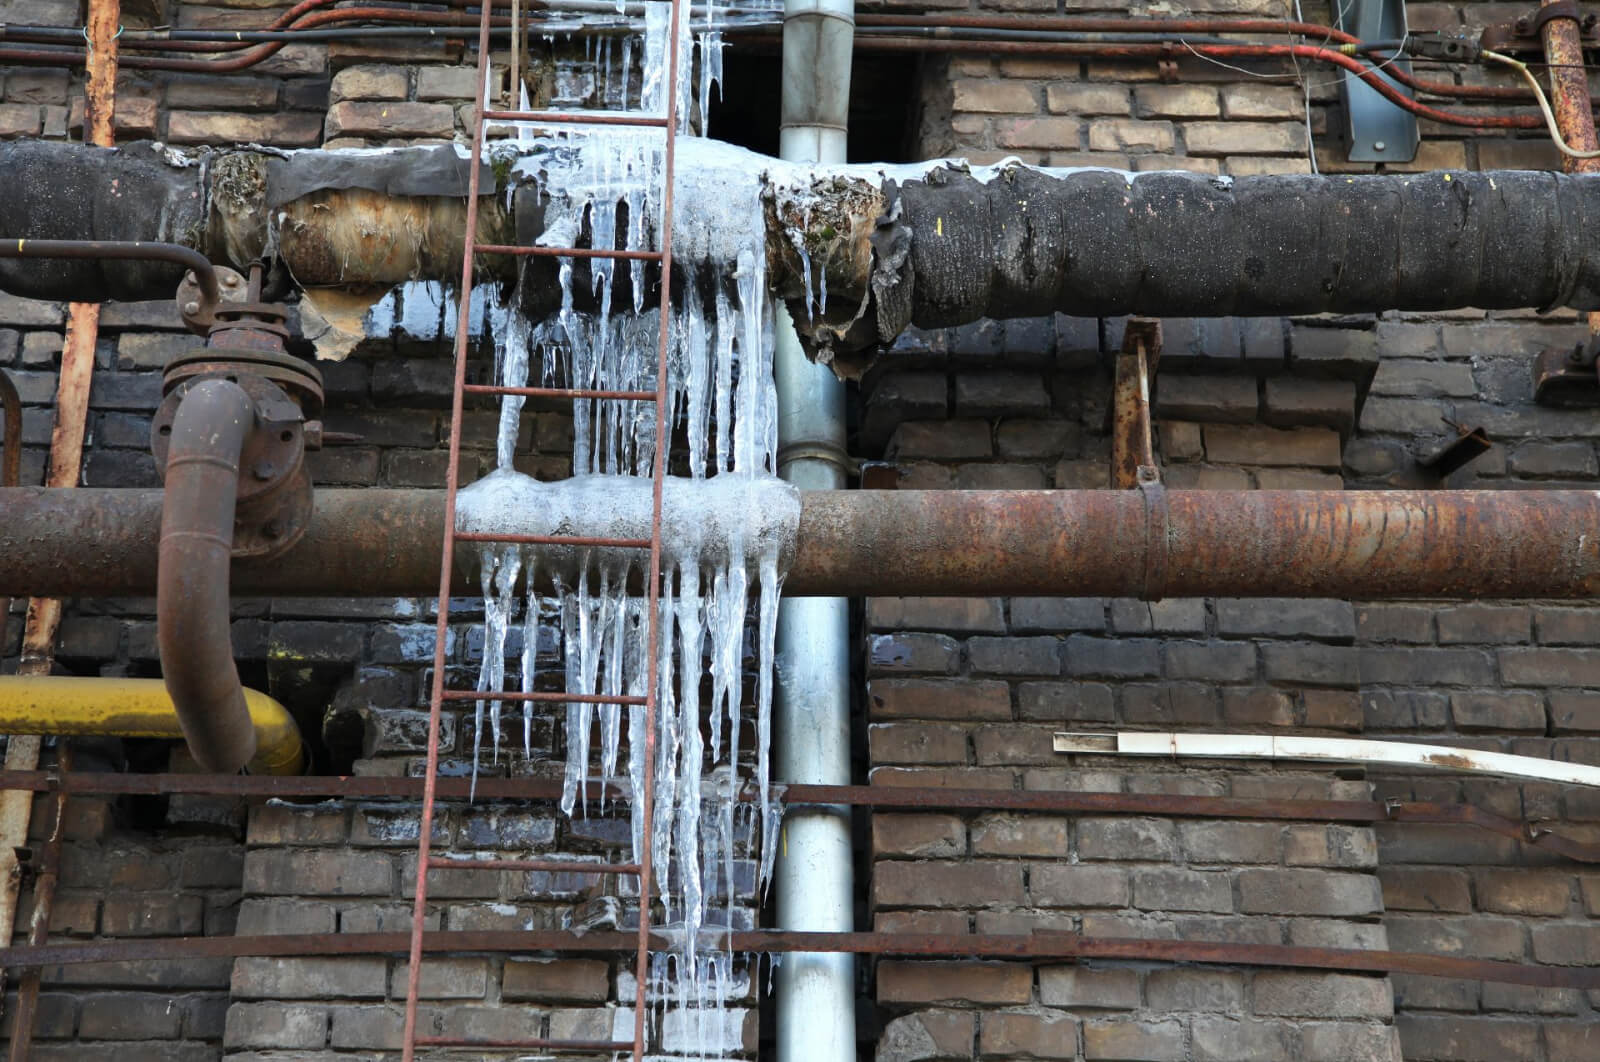 A row of rusty pipelines covered with ice from the cold air